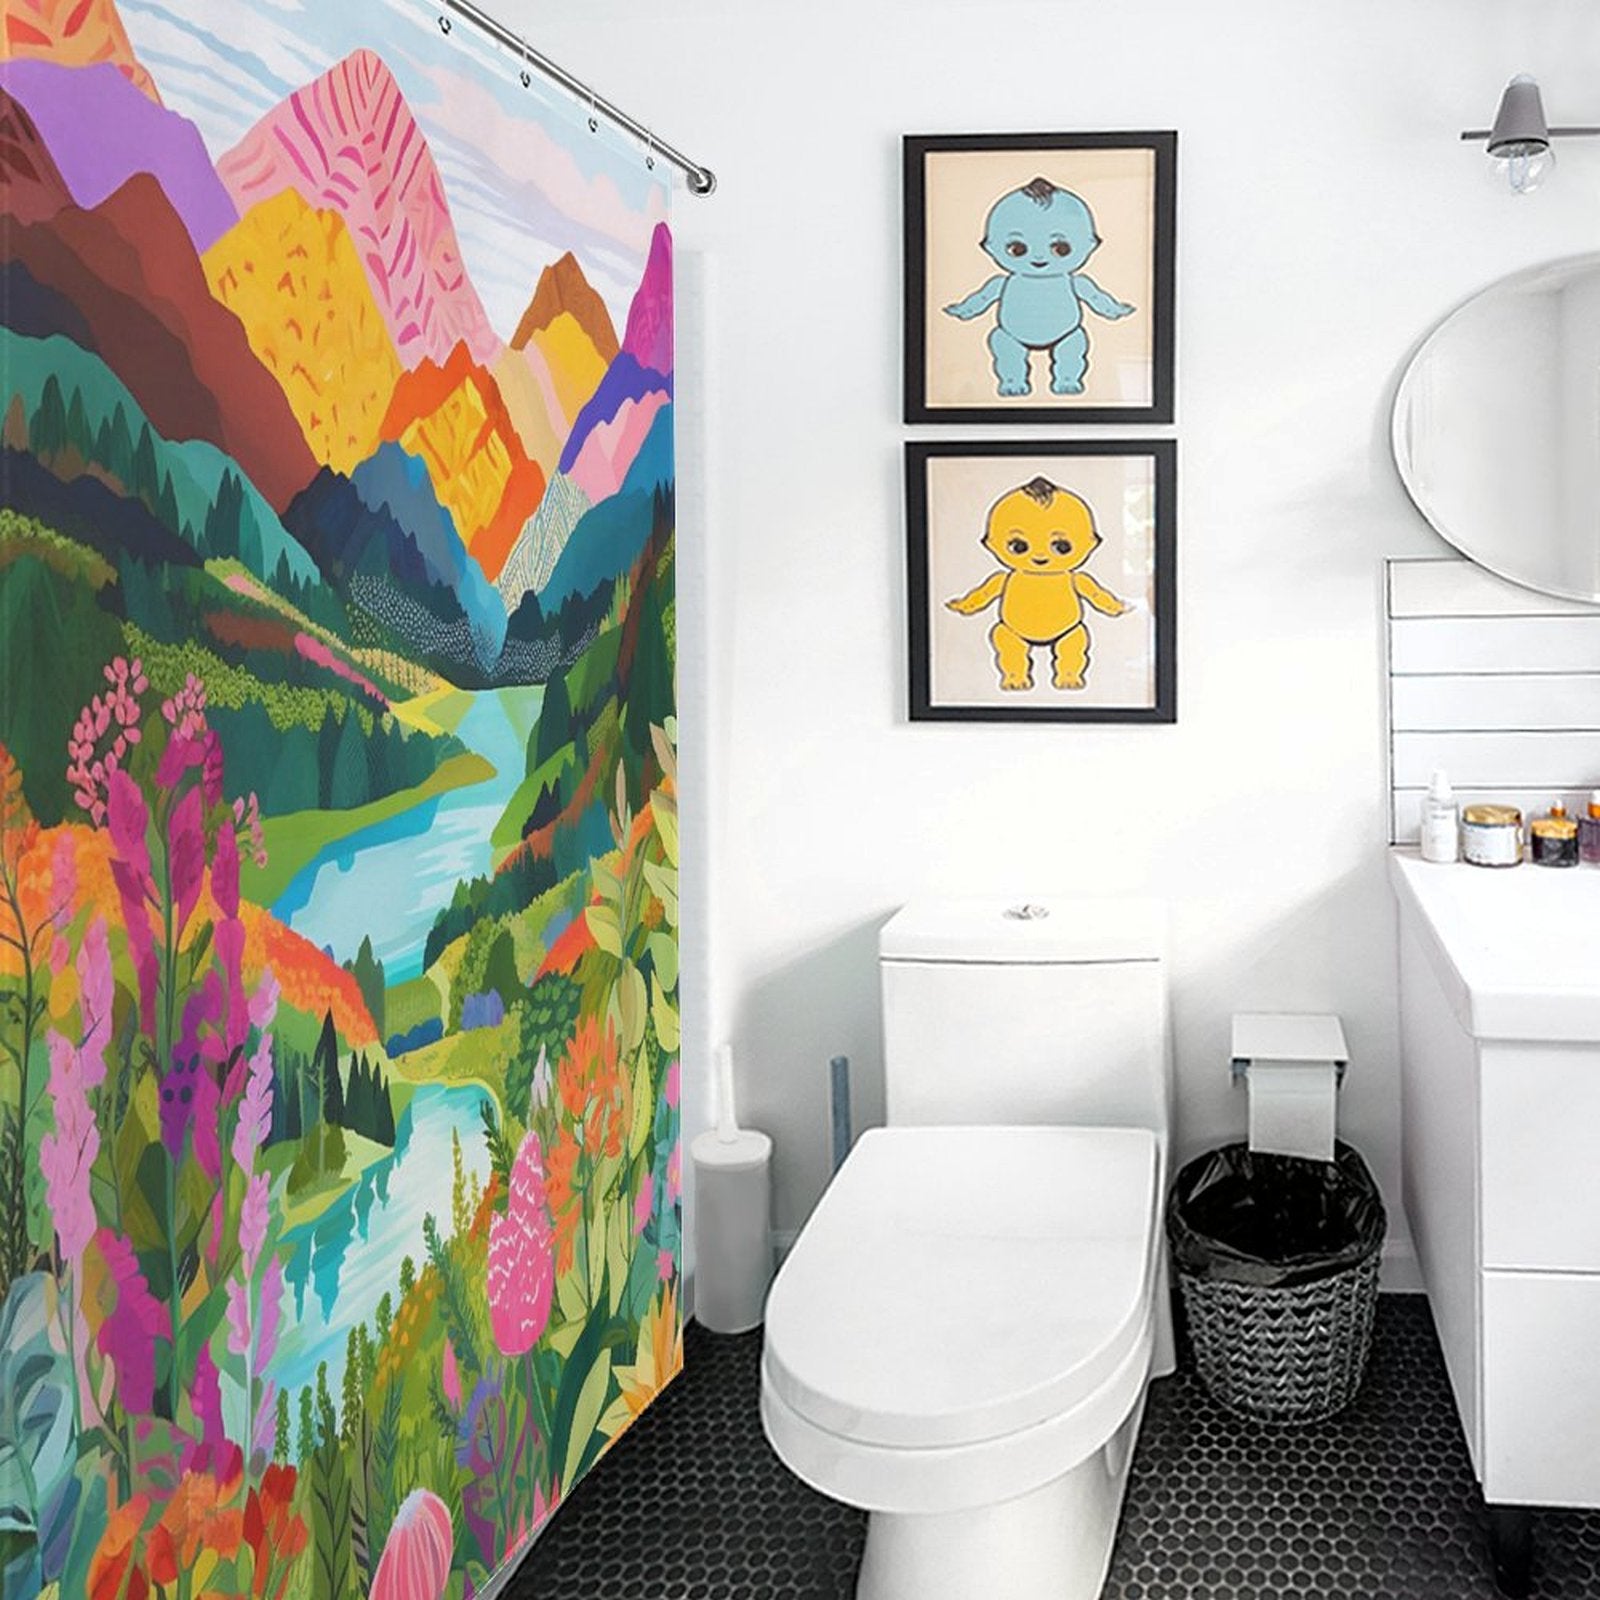 A bright bathroom featuring a Cotton Cat Nature Forest Lake Watercolor Art Painting Landscape Colorful Green Mountain Abstract Shower Curtain, a toilet, a vanity with a circular mirror, and two framed cartoon pictures of blue and yellow characters on the wall. The nature-inspired decor adds a charming touch.